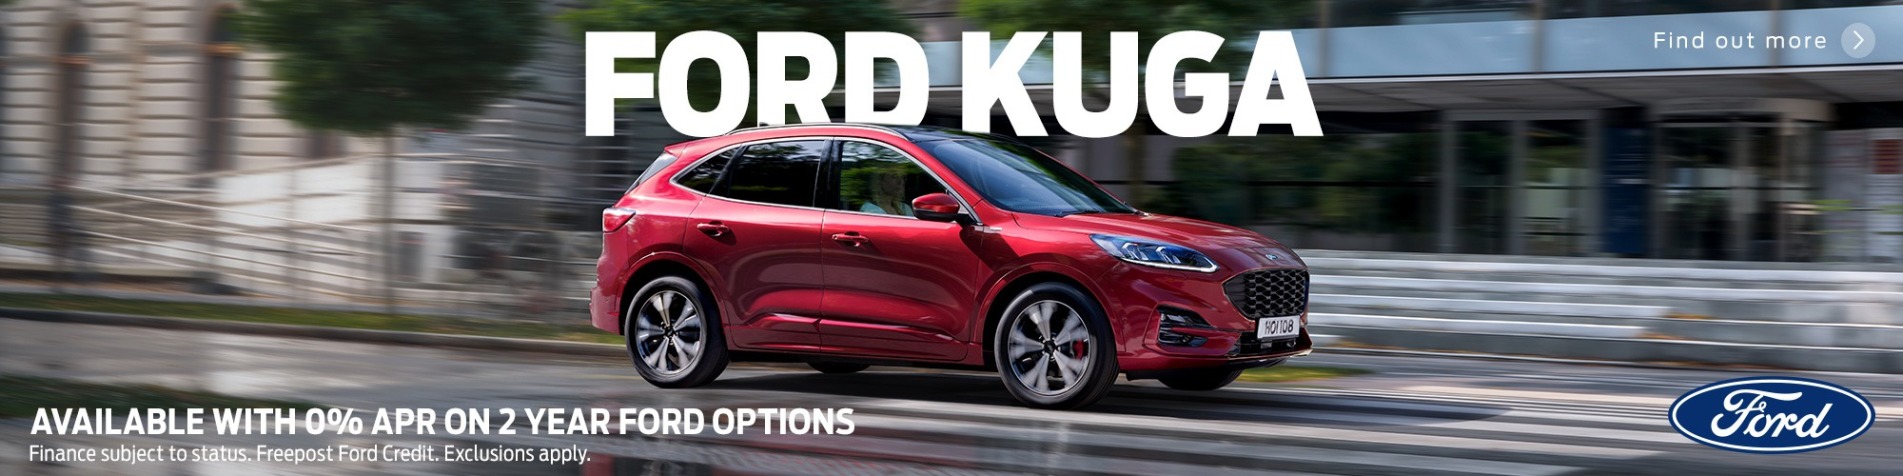 New Ford Kuga Banner Promotion